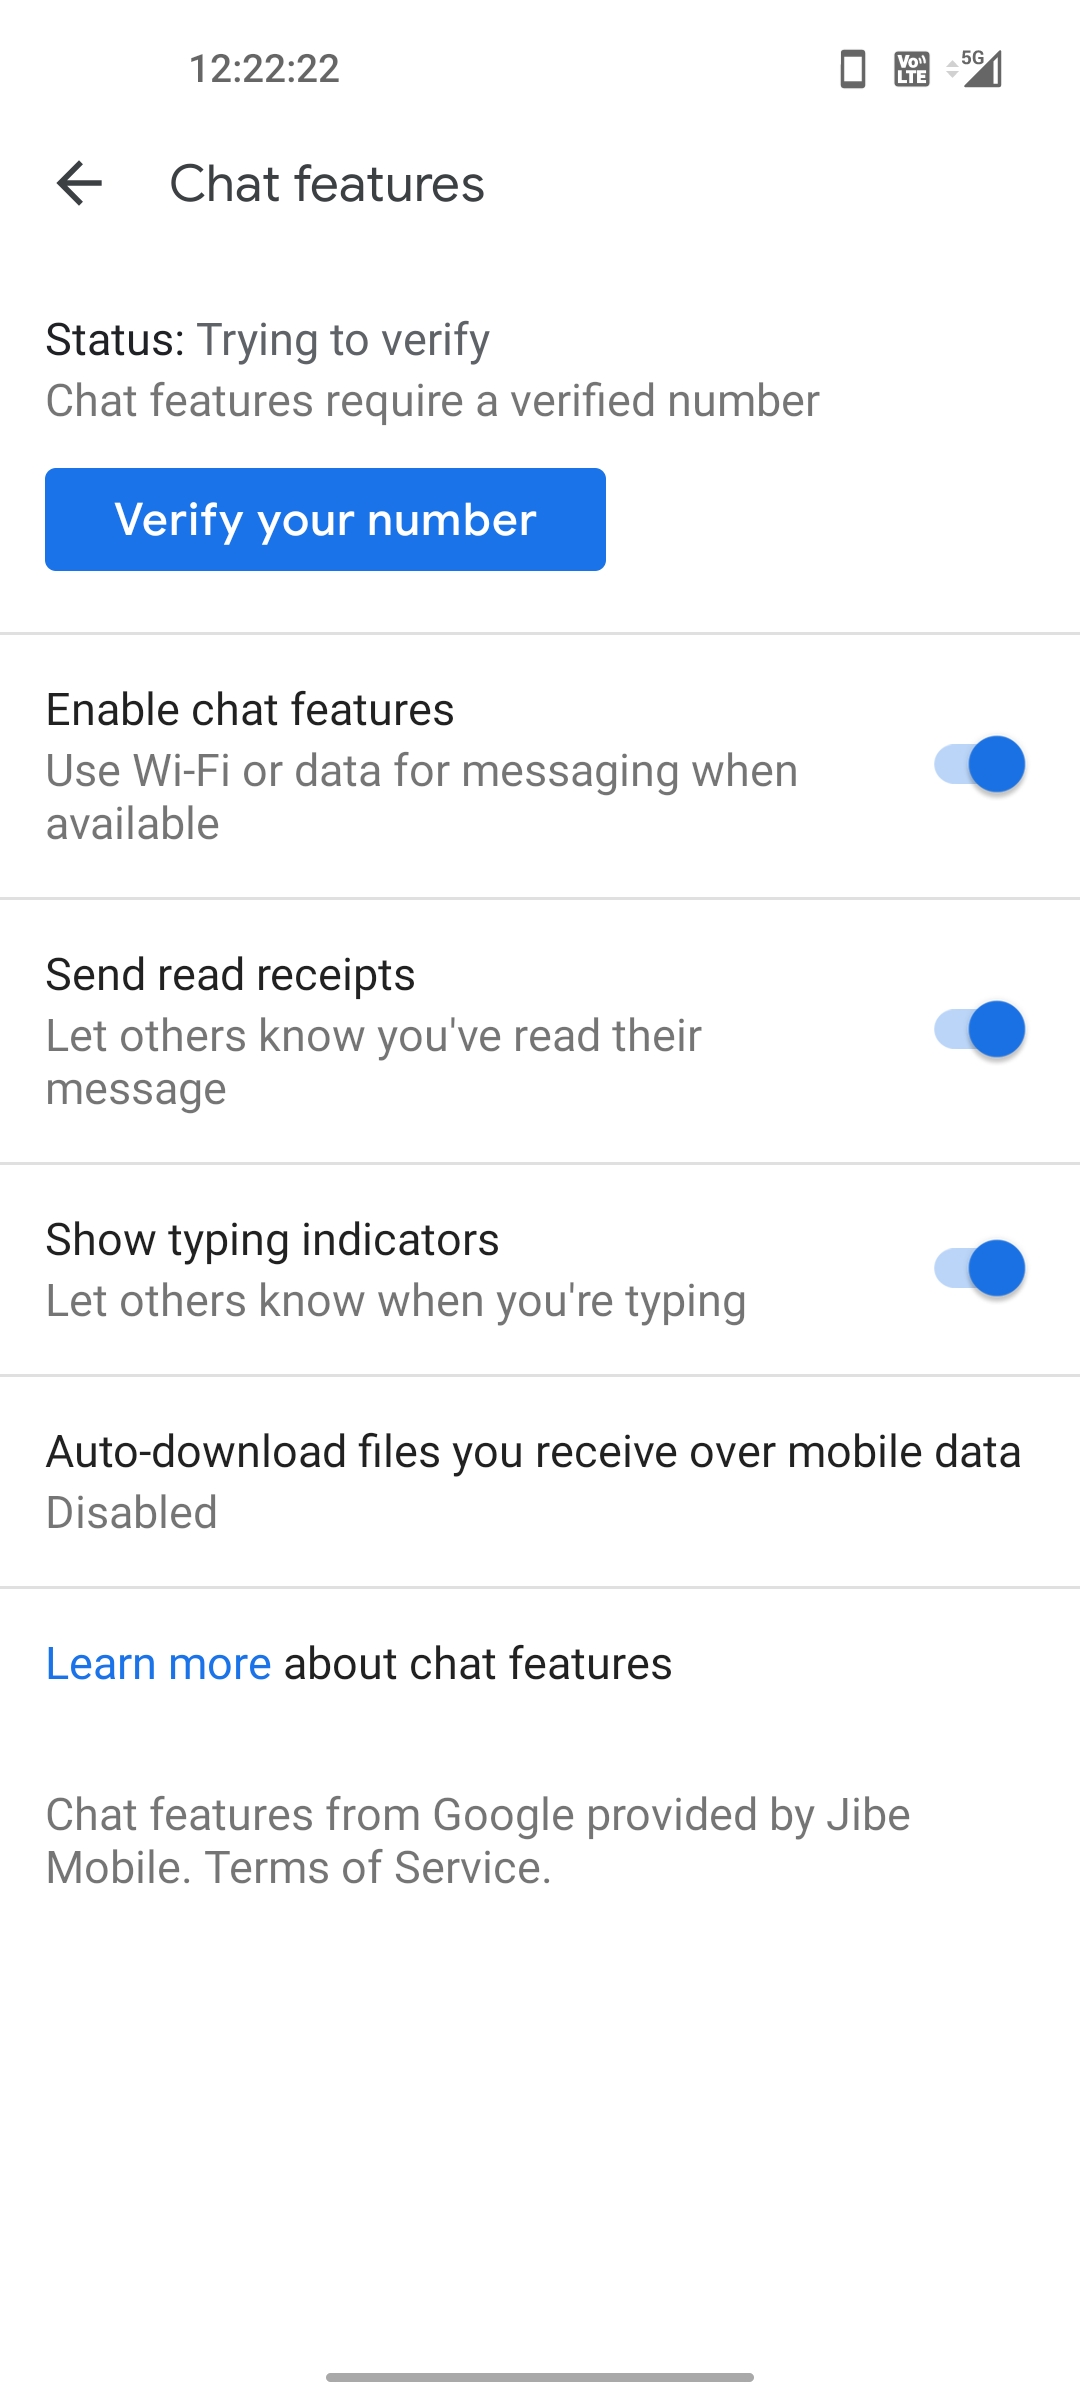 Can't enable chat features. Stuck at Trying to verify Messages Community